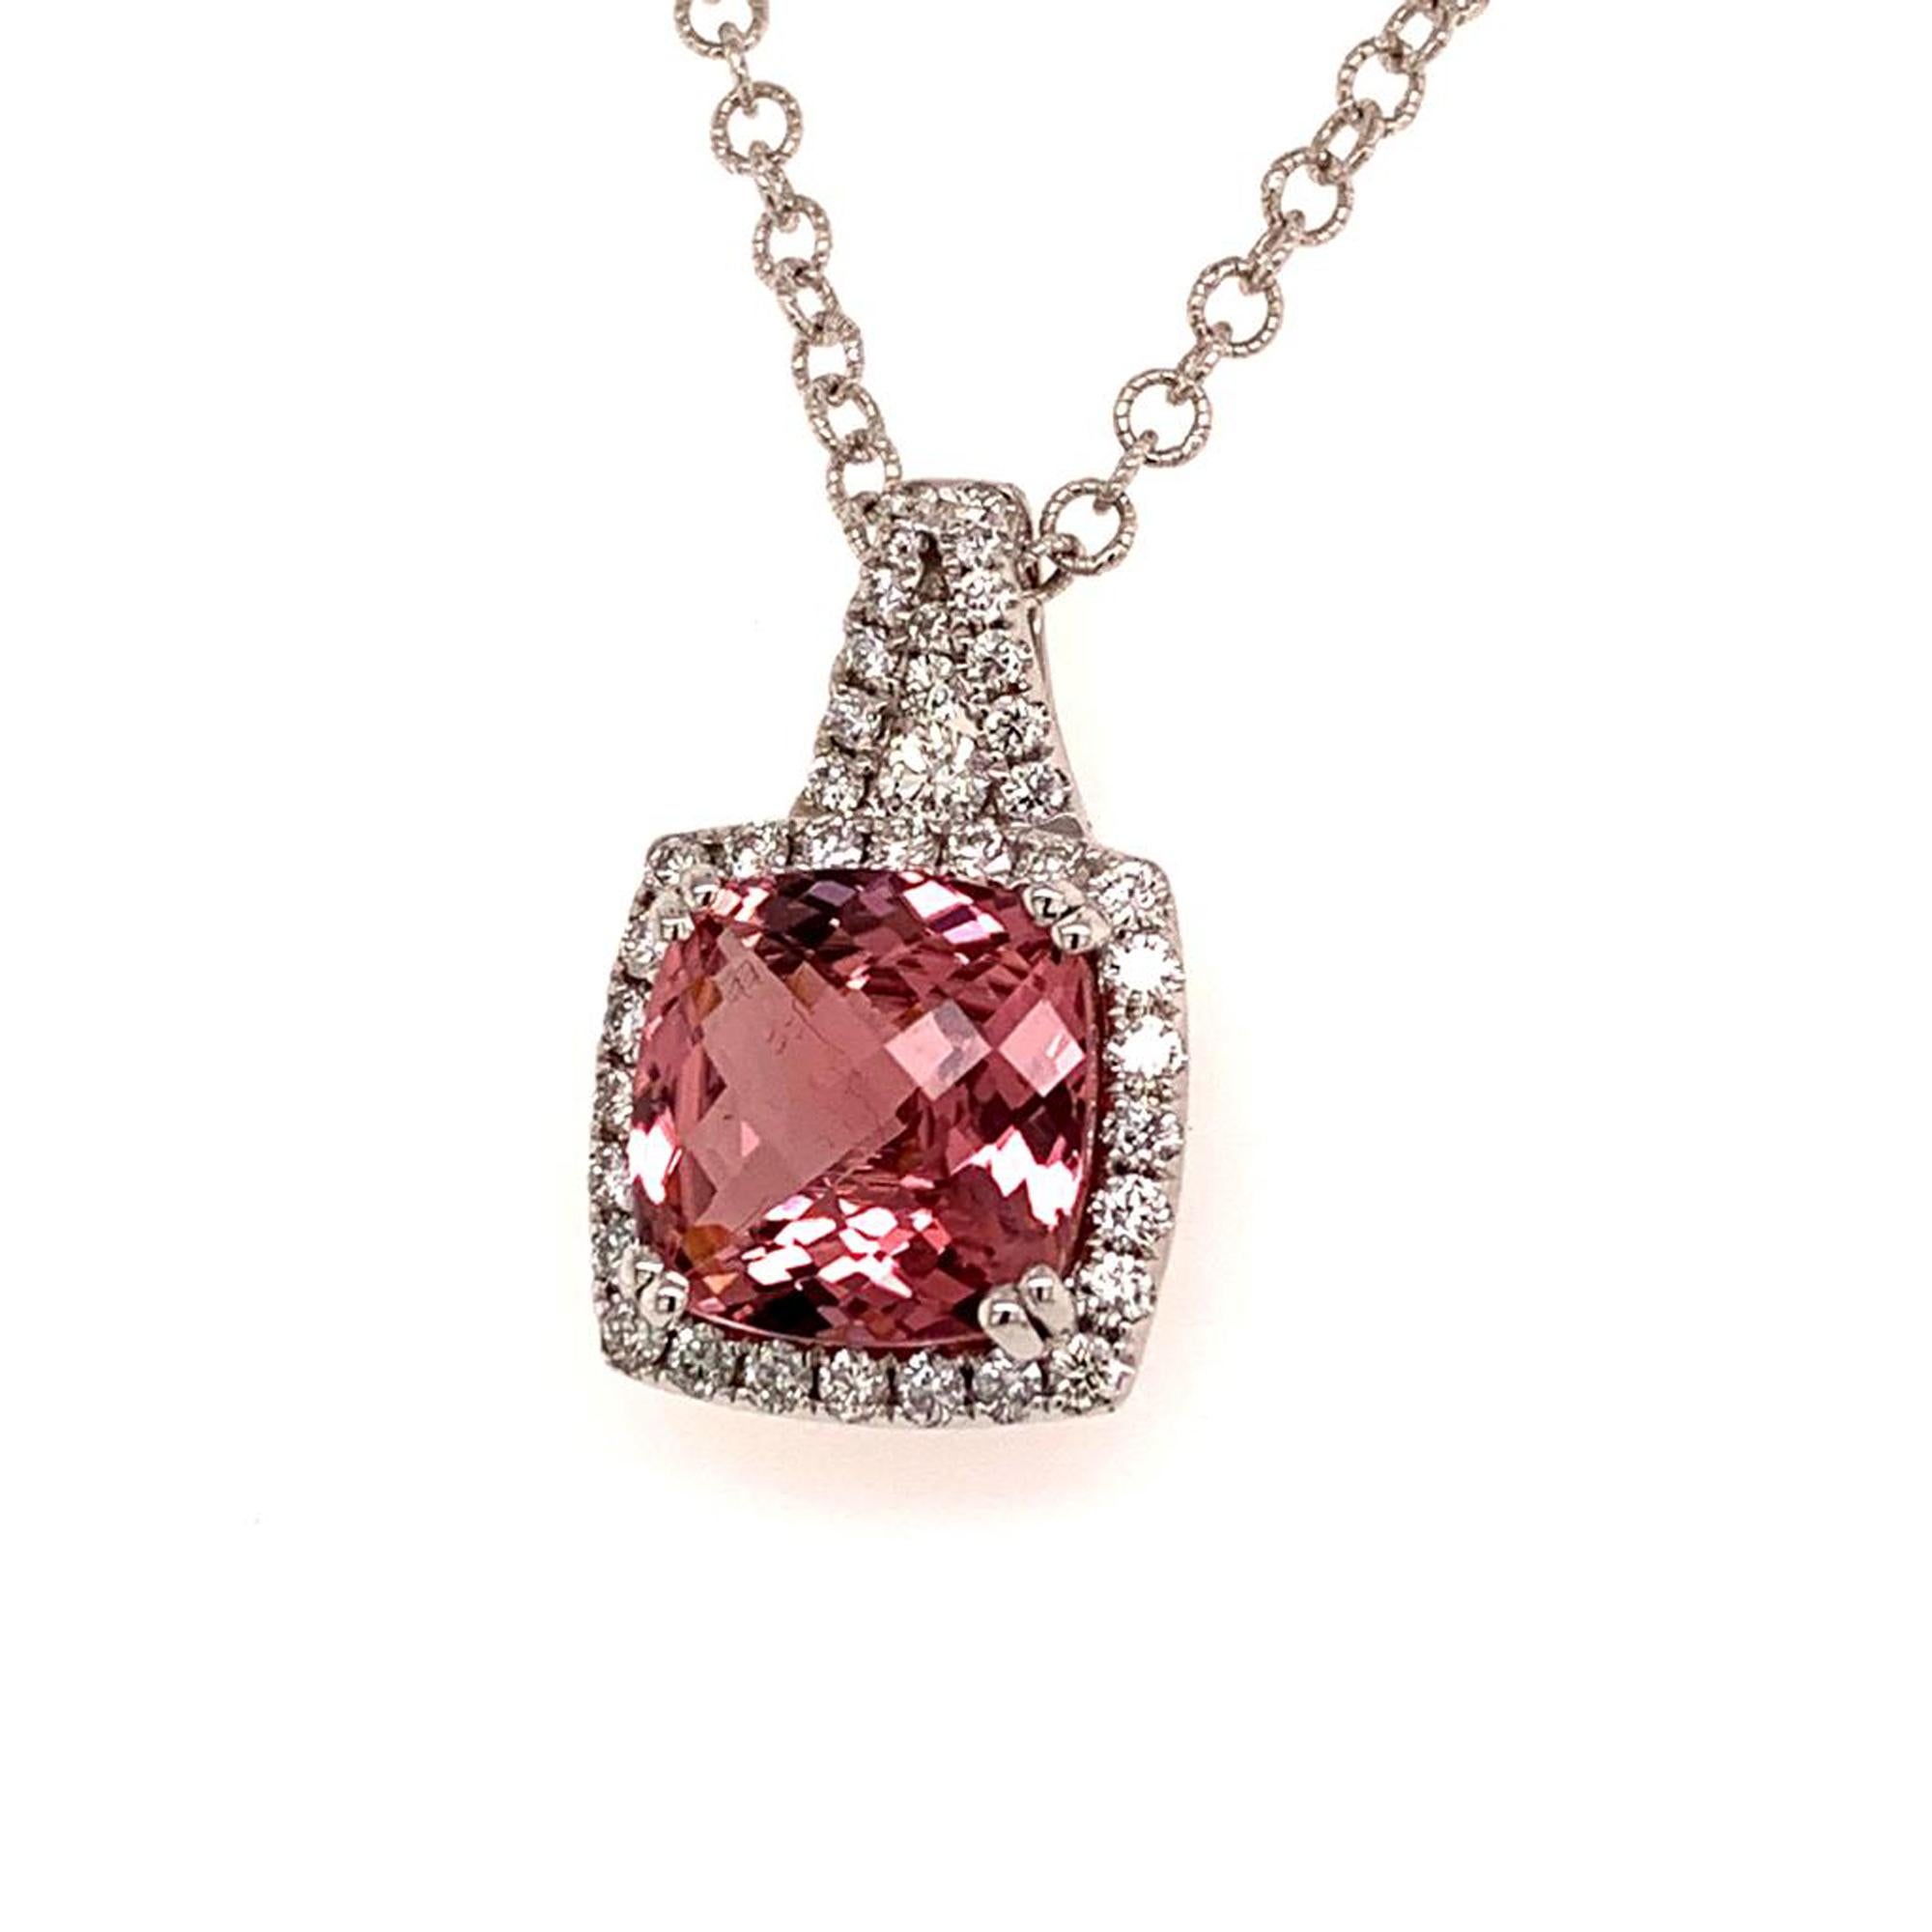 Round Cut Diamond Rubellite Tourmaline Necklace 5.47 TCW 18k Gold Certified For Sale